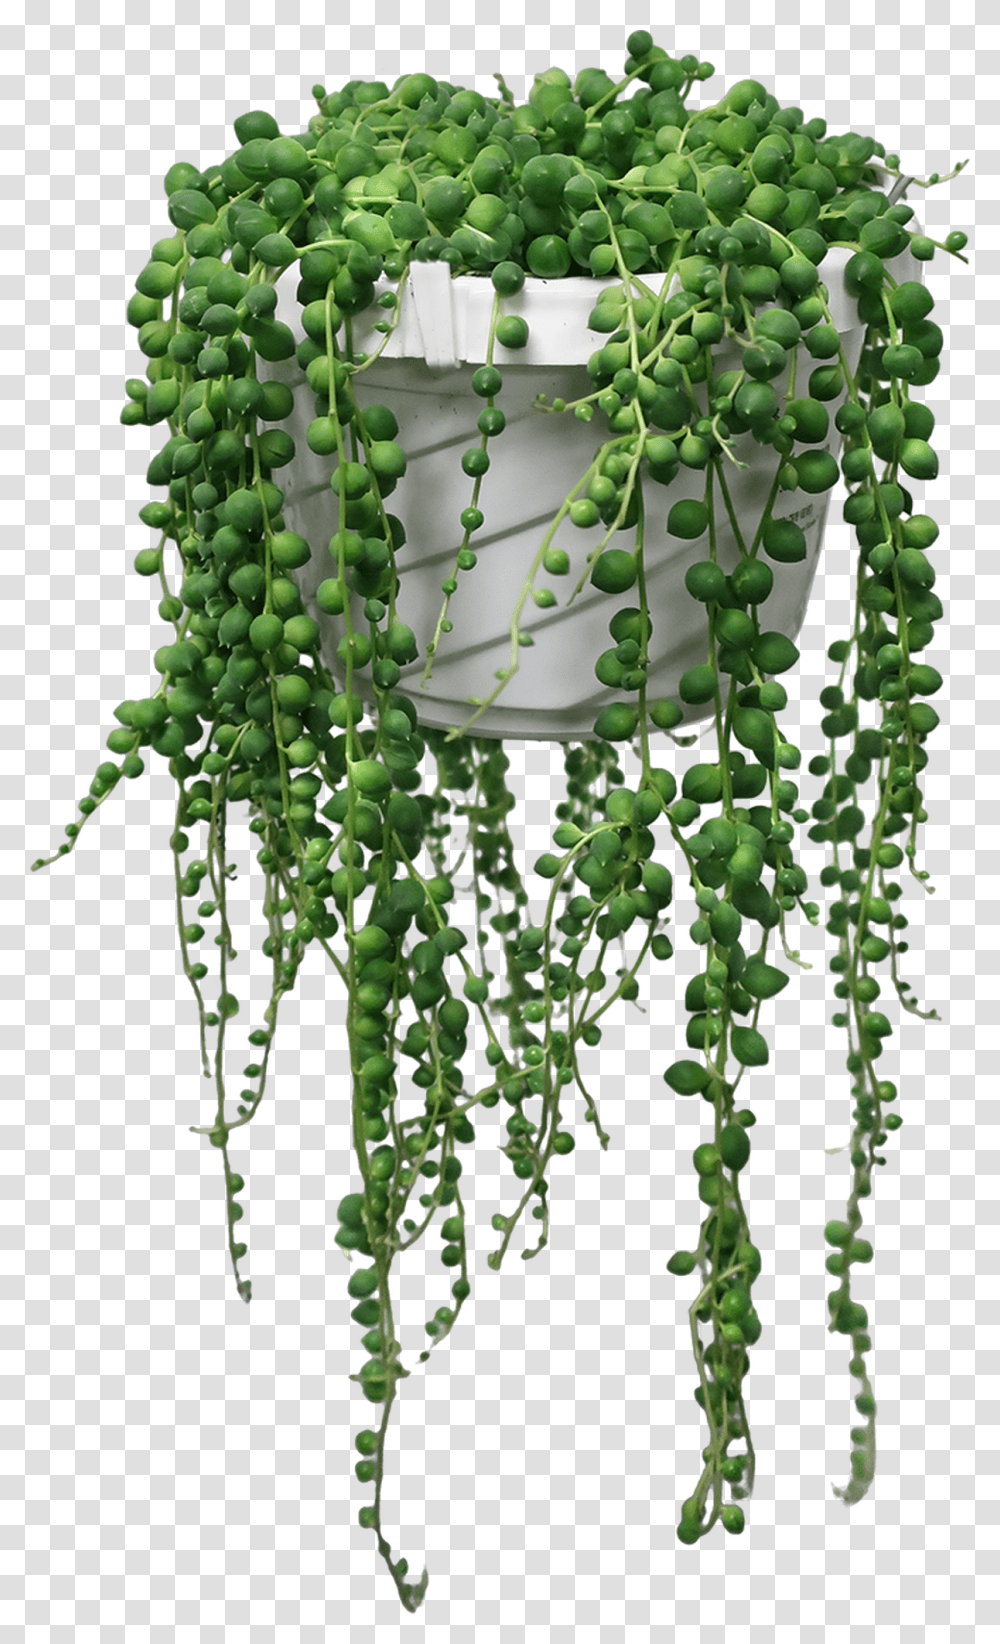 String Of Pearlsbeads In A Hanging Basket 6quot Pearl Plant, Vine, Grapes, Fruit, Food Transparent Png